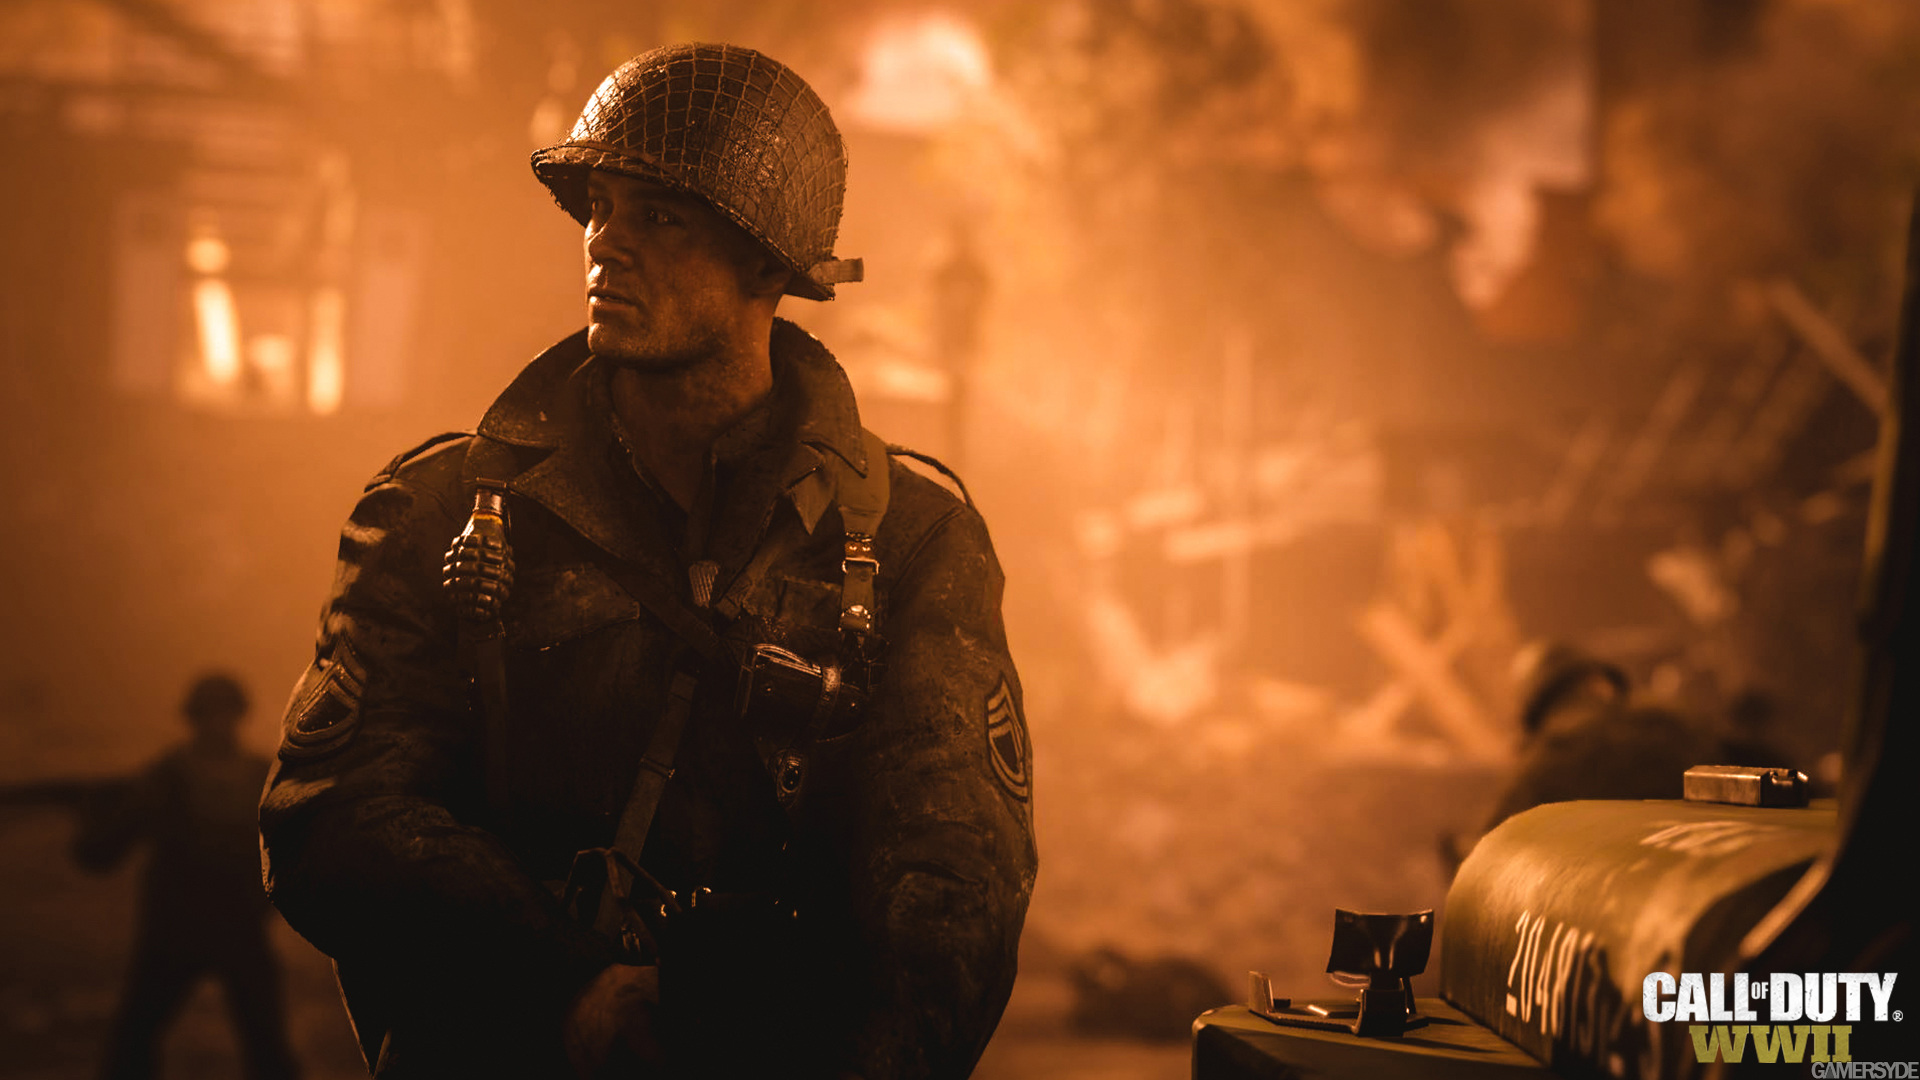 image_call_of_duty_wwii-35209-3843_0002.jpg